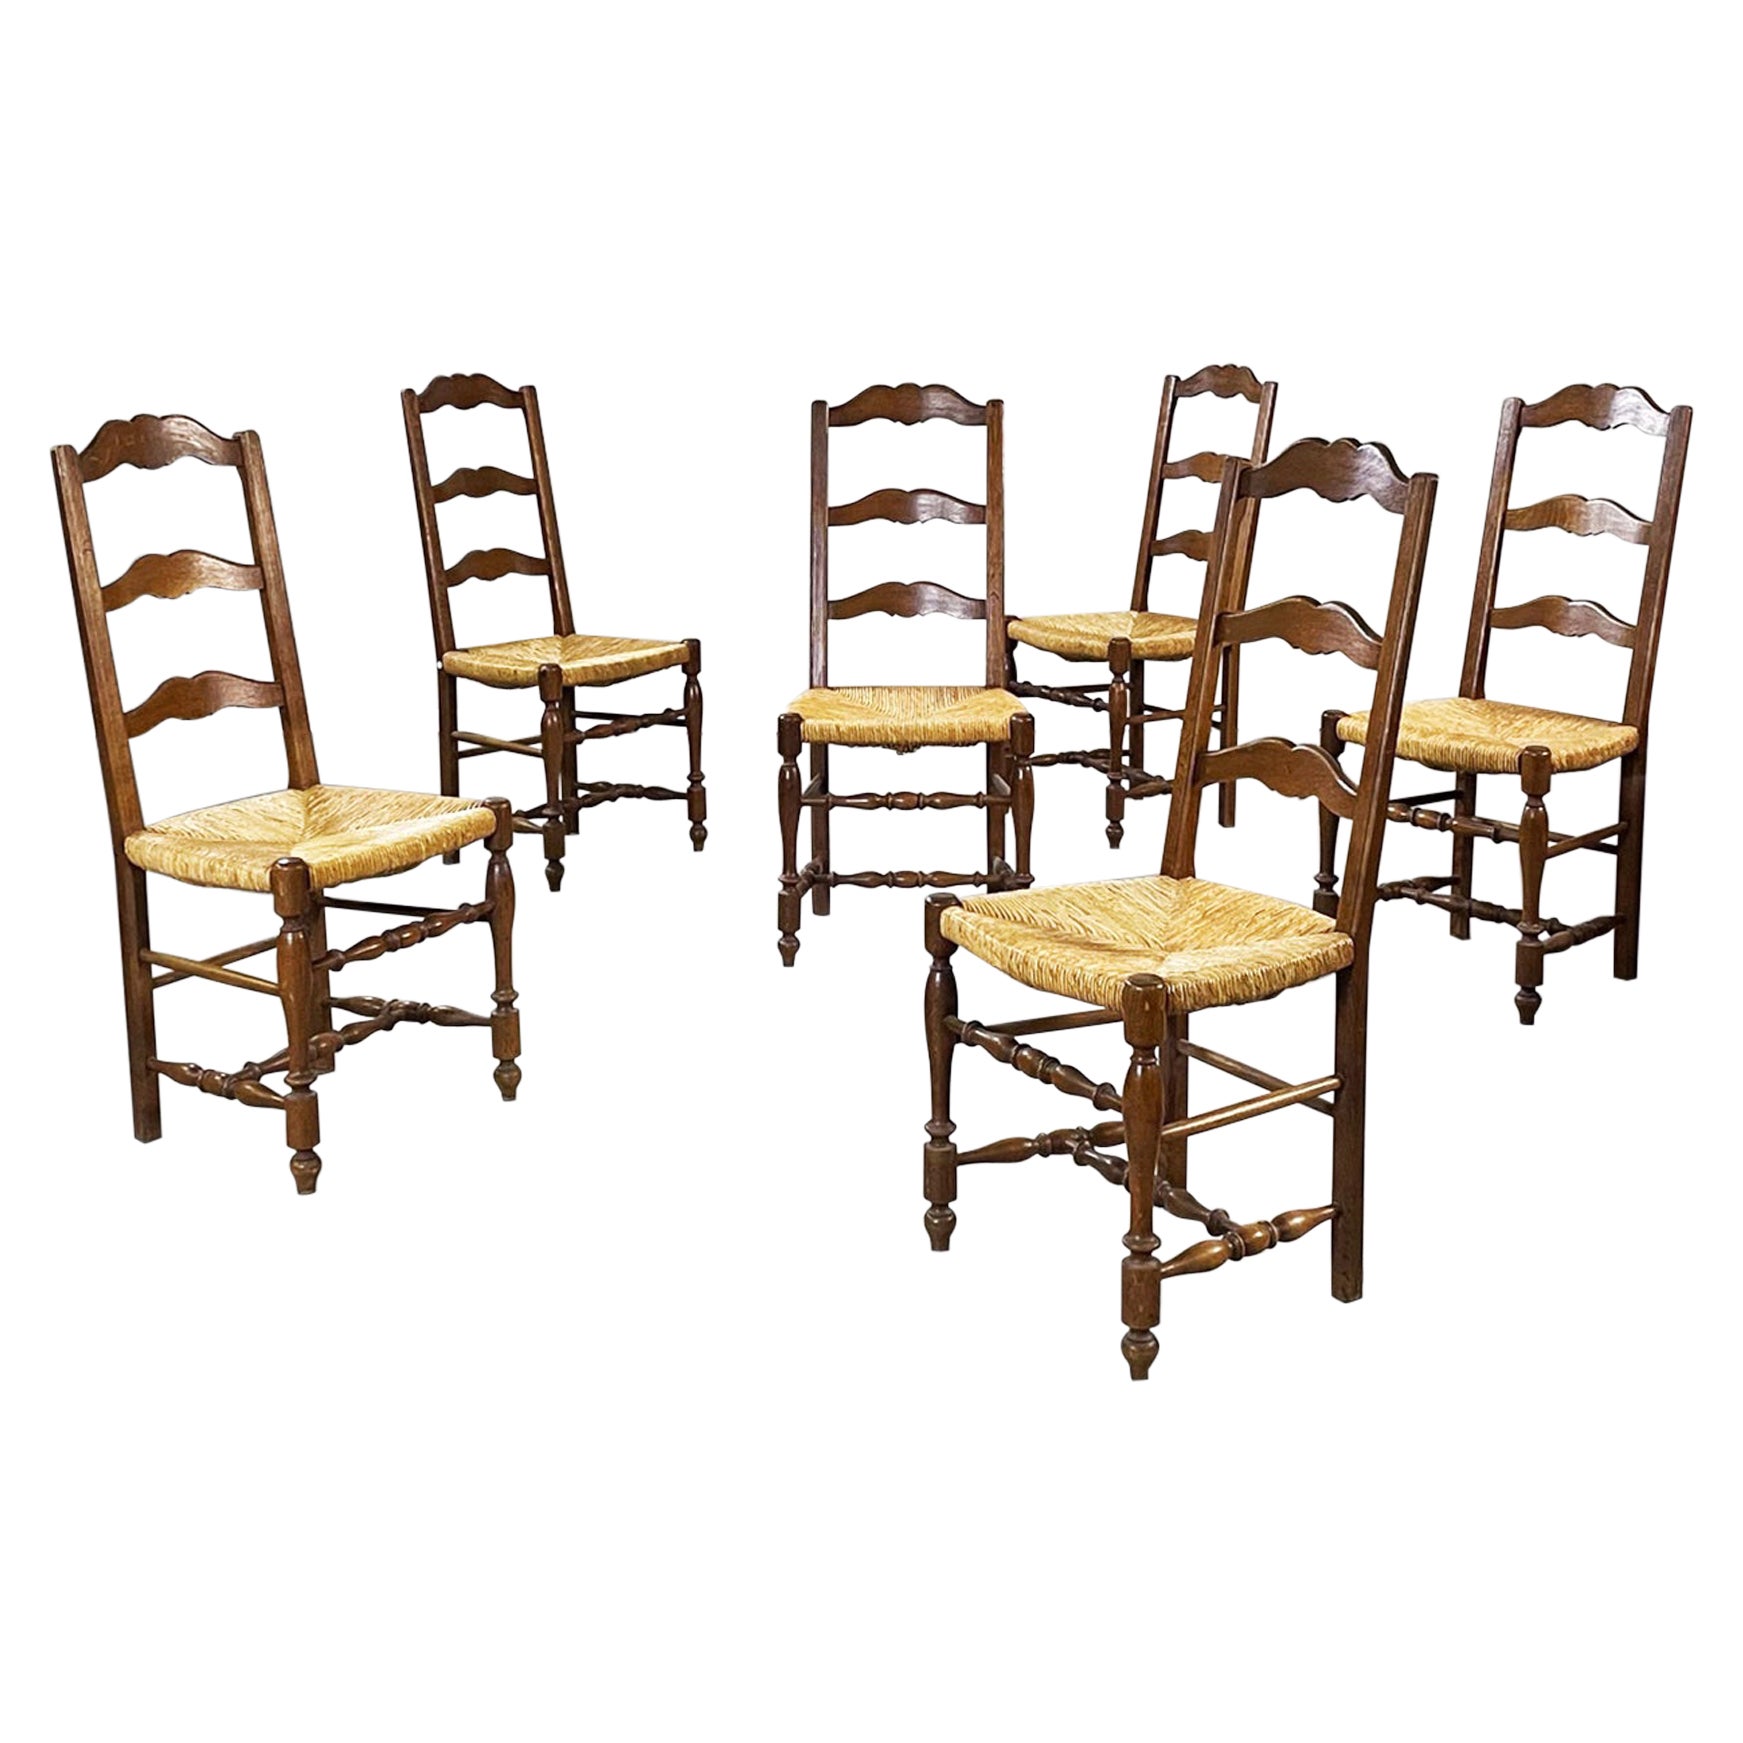 Italian Nineteenth Century Finely Crafted Wooden and Straw Chairs, Late1800s For Sale